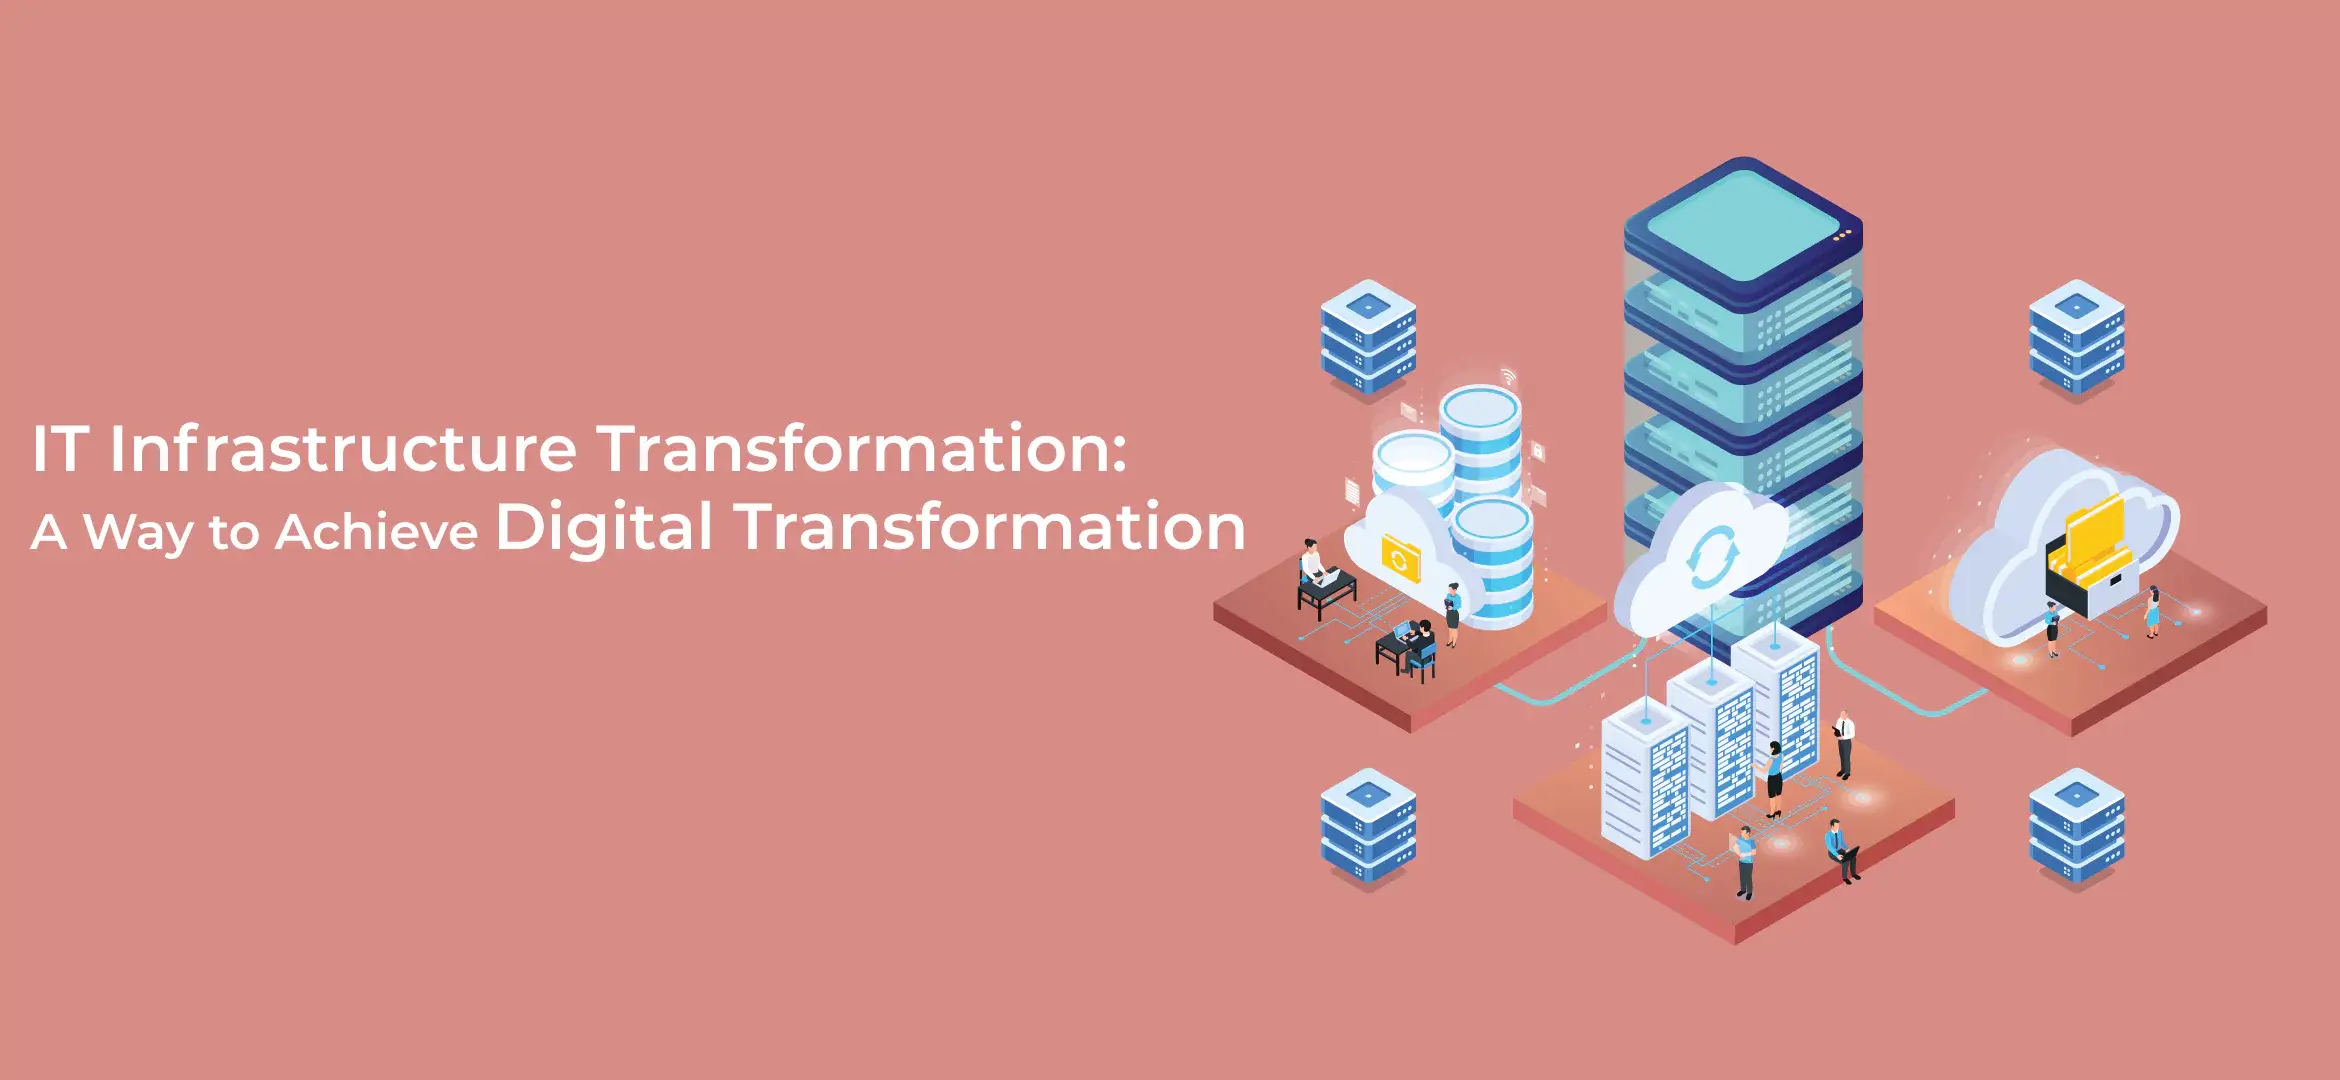 IT Infrastructure Transformation: A Way to Achieve Digital Transformation